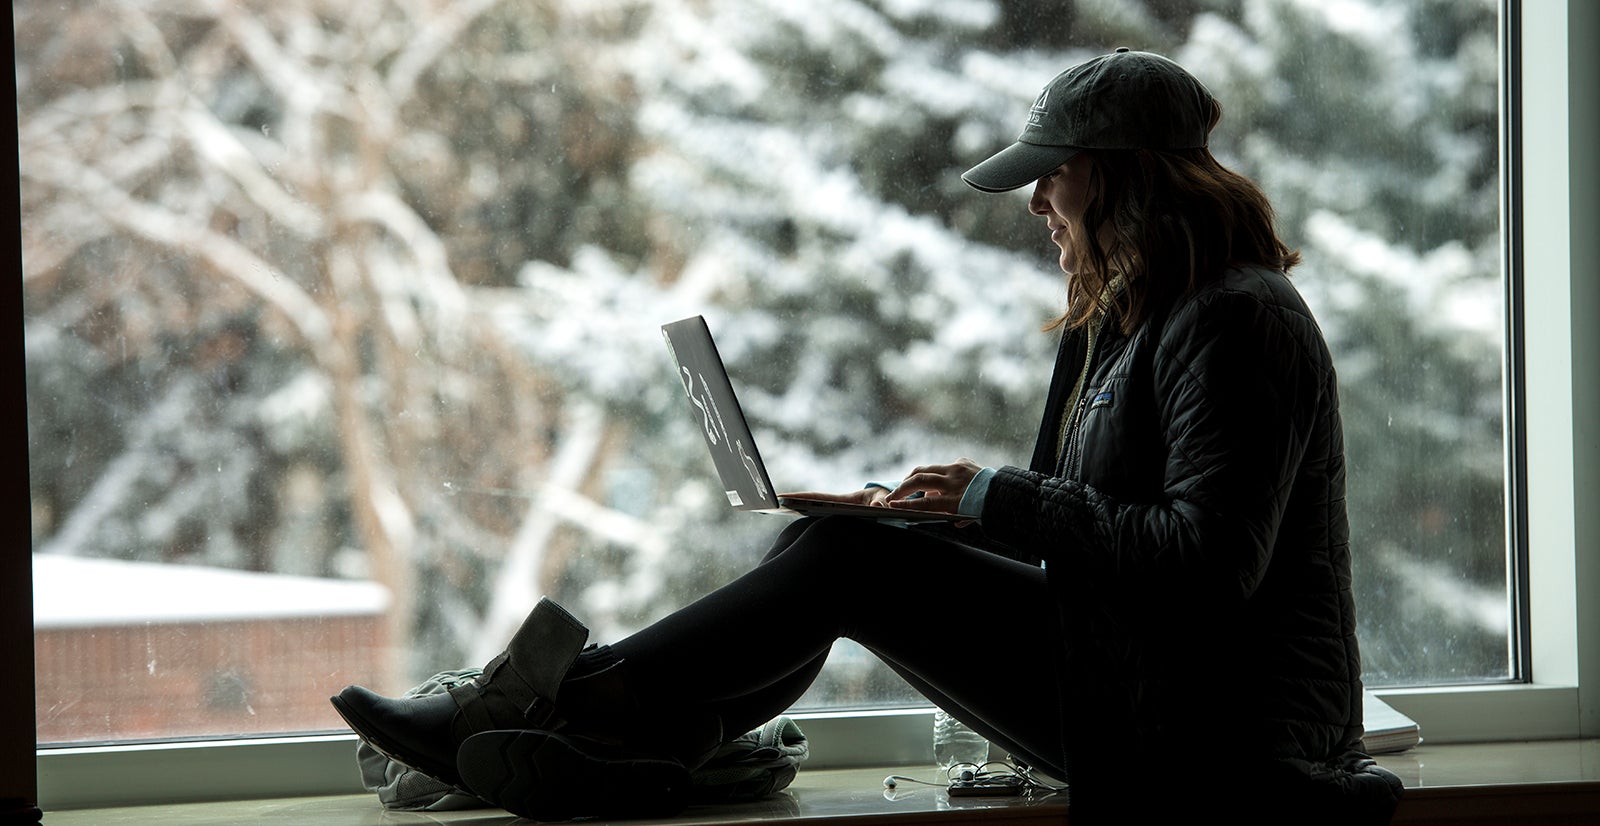 student working on laptop while sitting by a window with a snowy scene